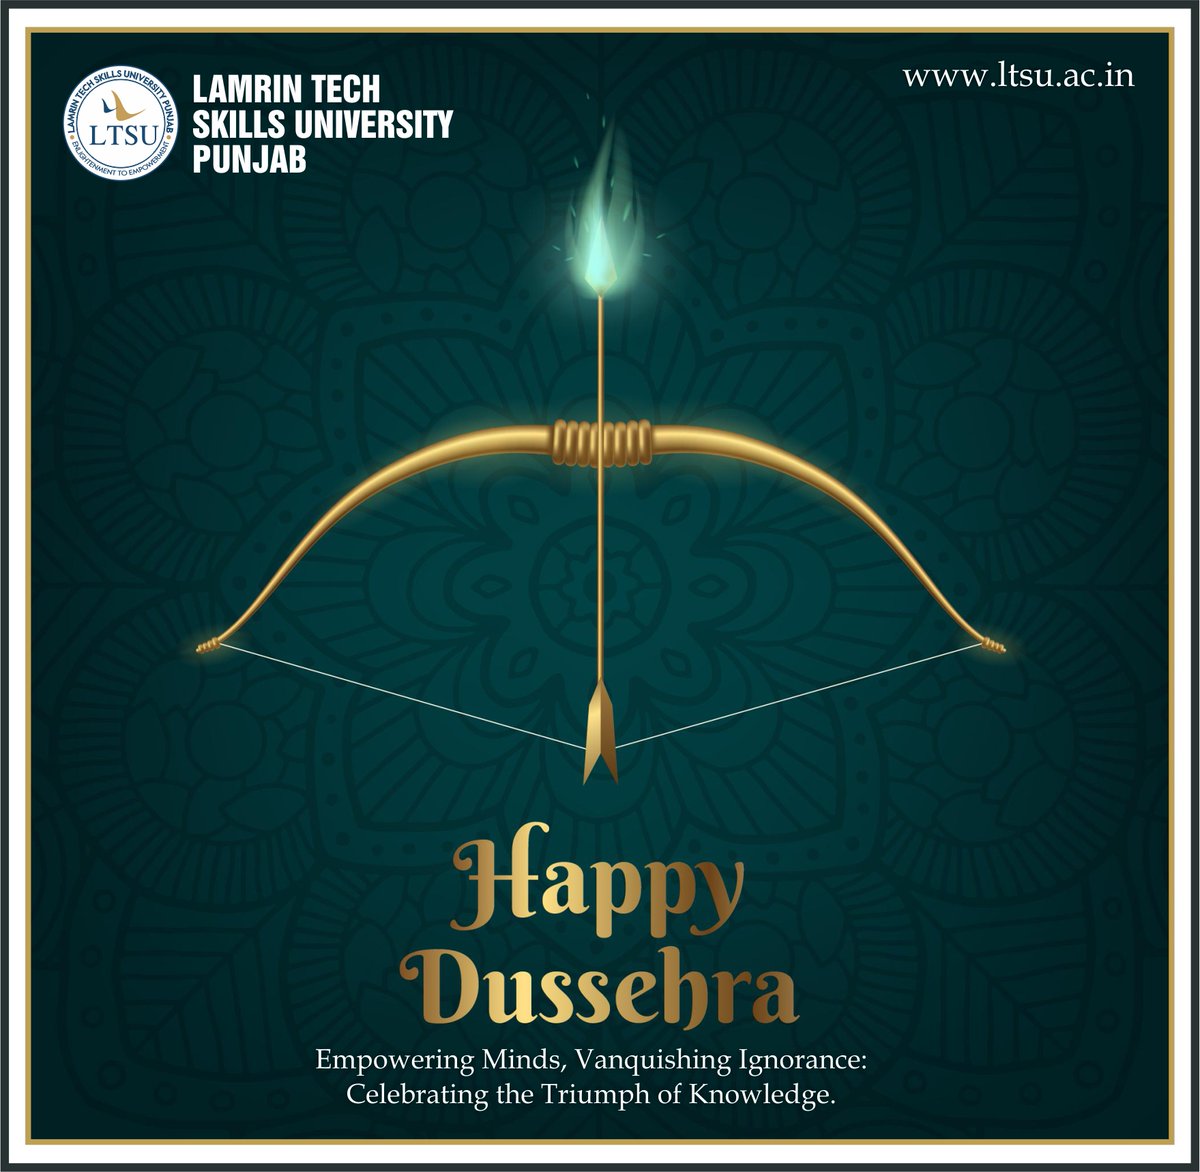 On the auspicious occasion of Dussehra, may the goodness inside you conquer the darkness around you. Wishing you a Happy celebrations of the day.
#HappyDussehra #TriumphOfGood #PositiveVibes #FestivalGreetings #NSDC2022 #CMOPunjab